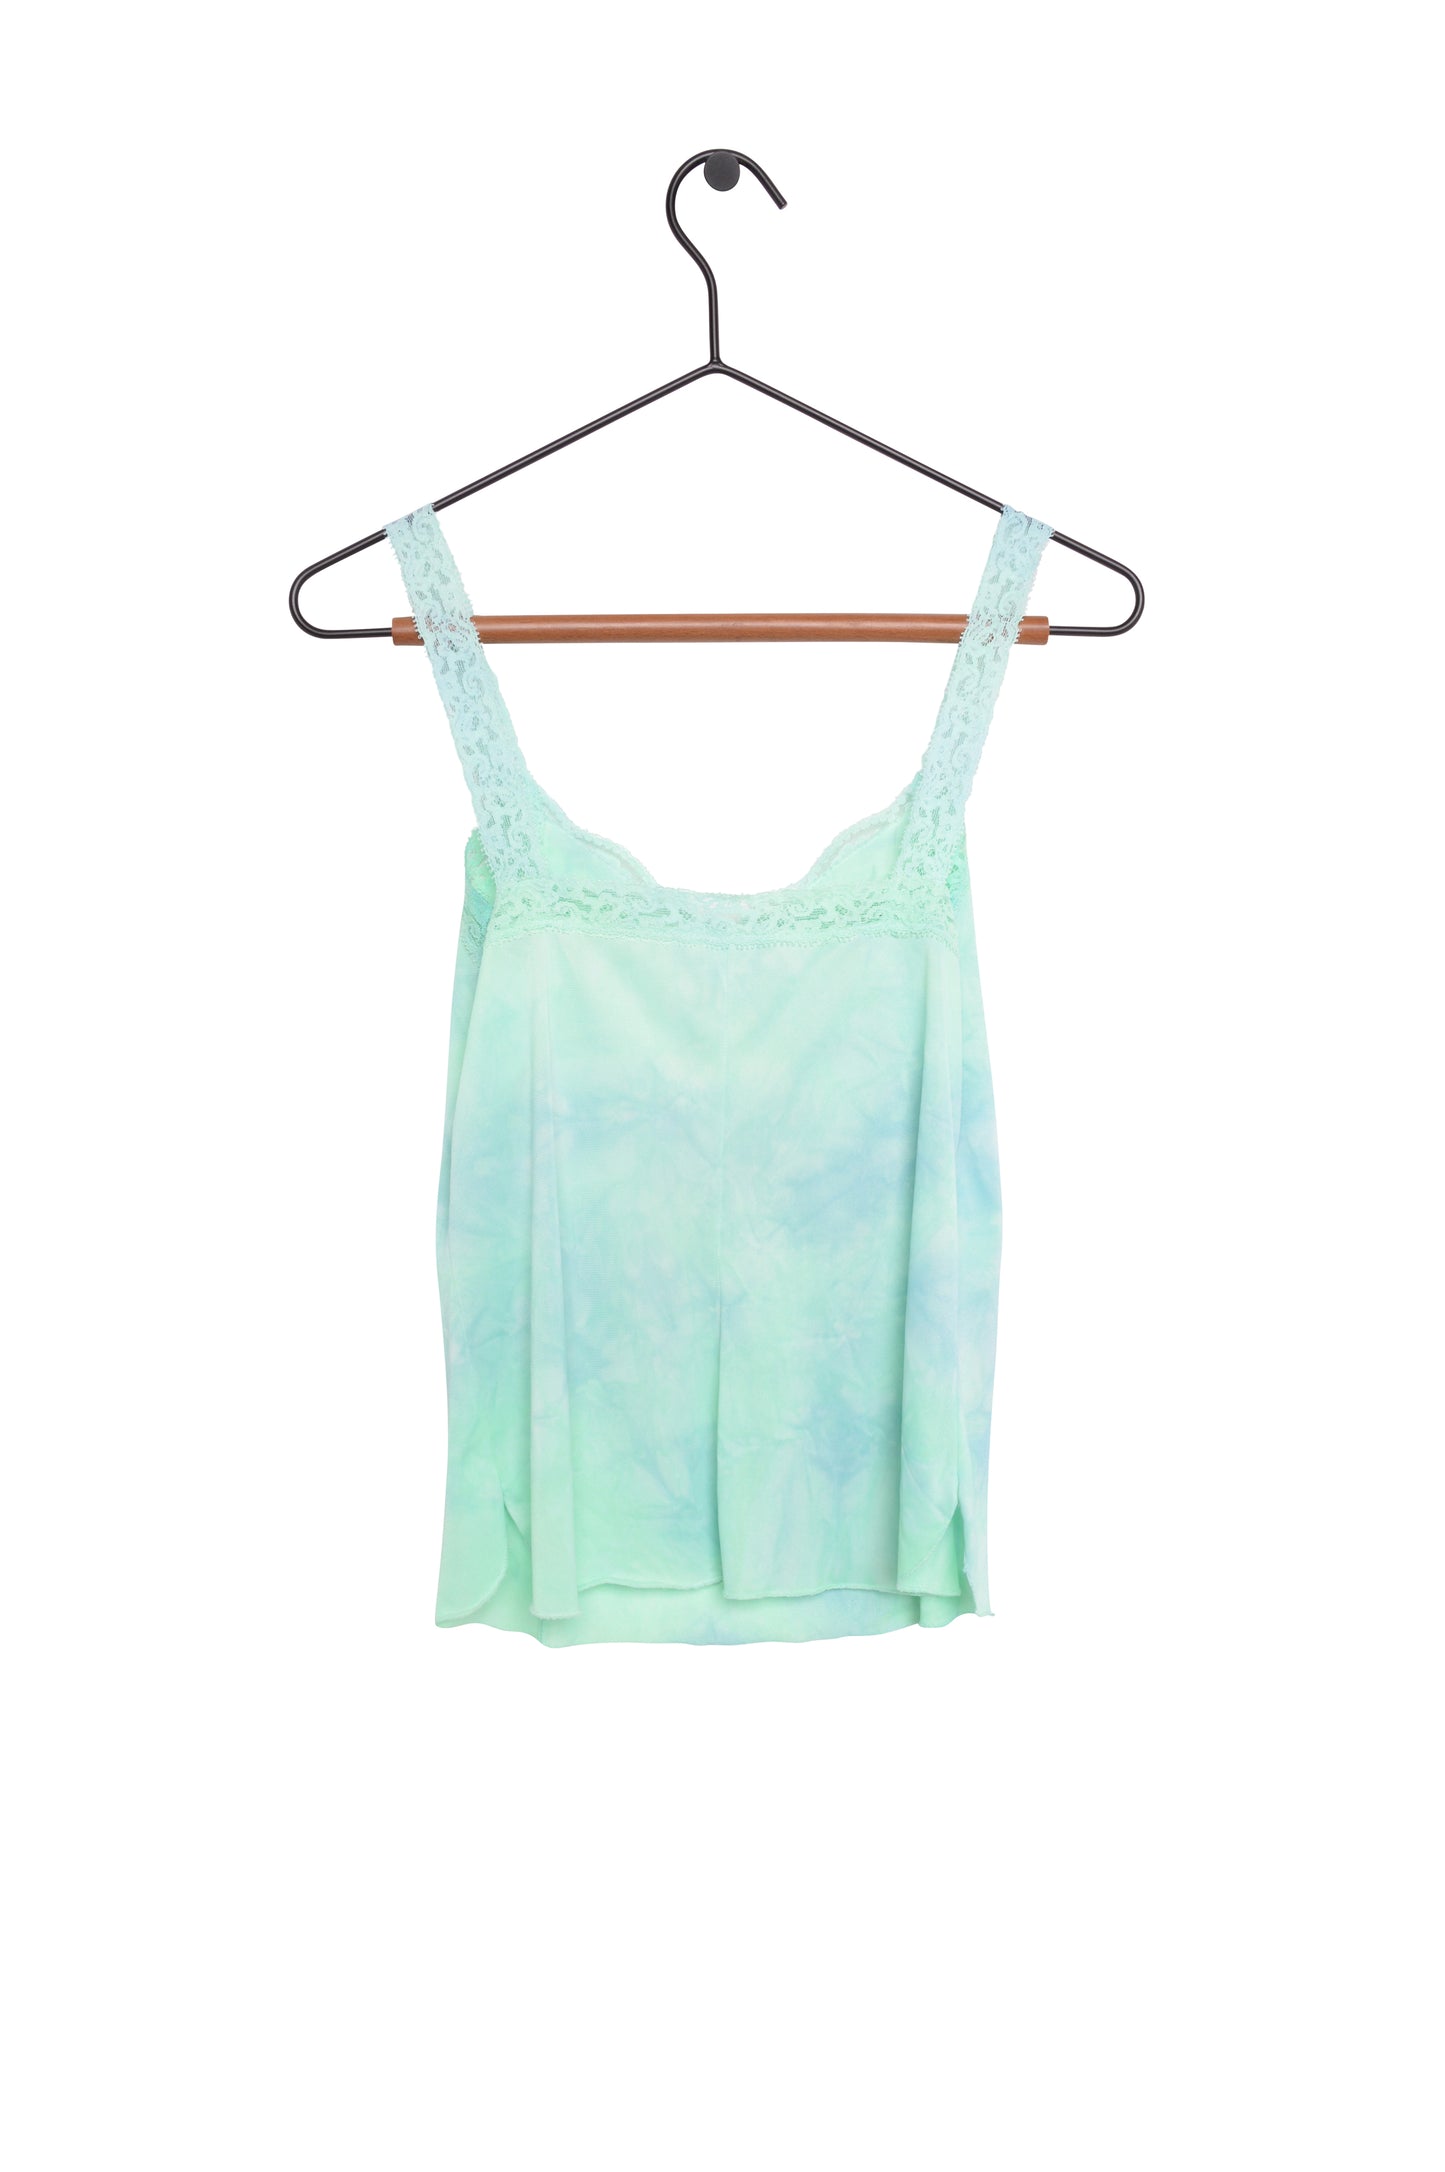 1950s Hand-Dyed Lace Slip Top